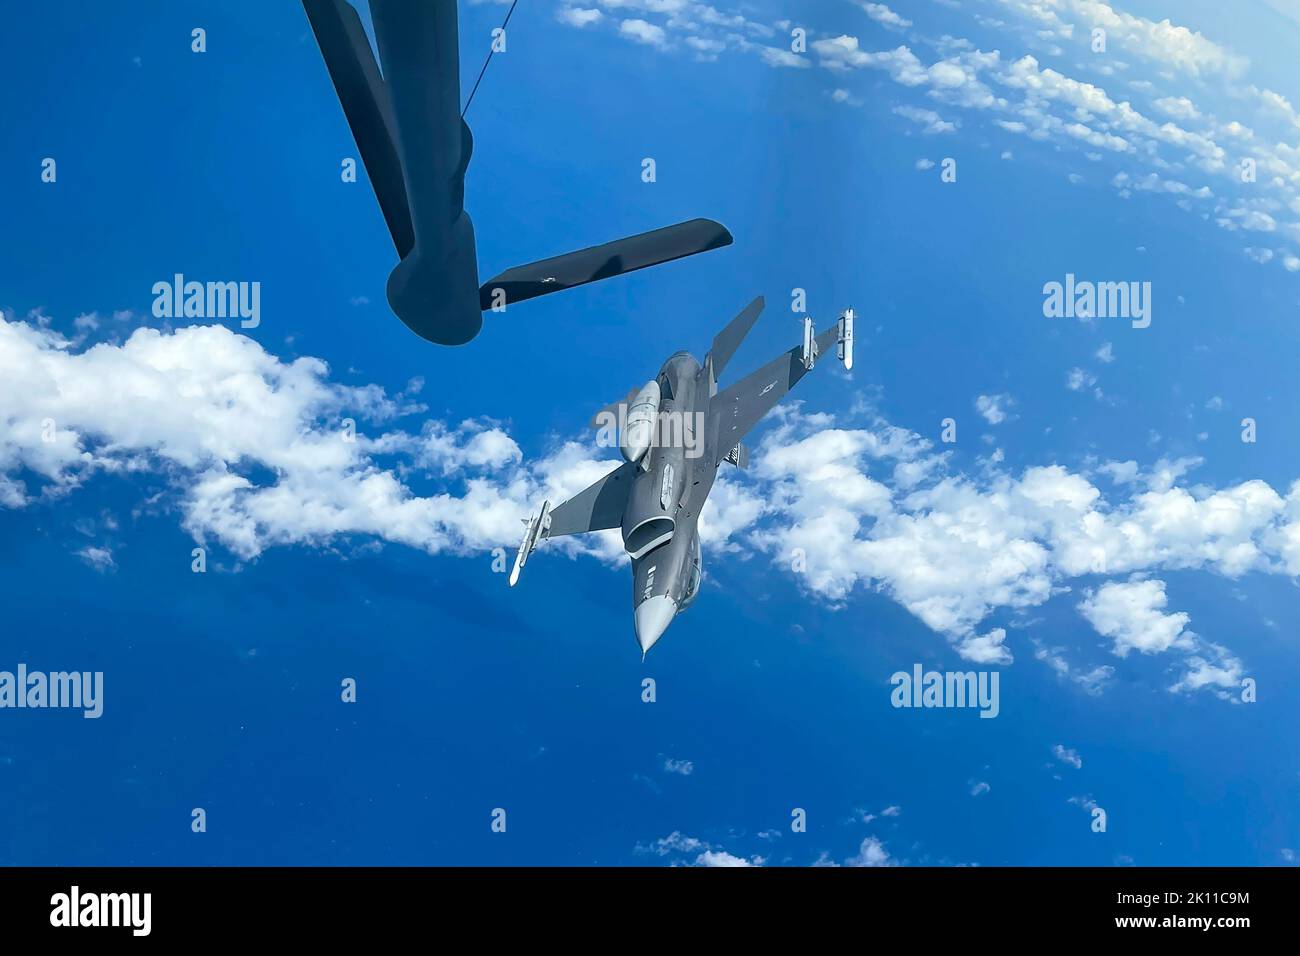 U.S. Air Force F-16 Fighting Falcon from the South Carolina Air National Guard’s, 157th Fighter Squadron refuels with the U.S Air Force KC-135 unit from the 92nd Air Refueling Wing during Relampago VII, an exercise in Barranquilla, Colombia, Aug. 30, 2022. The purpose of this exercise is to provide the Colombian Air Force with requested realistic interoperability training as allied countries, under NATO standards. South Carolina is Colombia’s State Partner in the State Partnership Program. (U.S. Air National Guard photo by Master Sgt. Nicole Szews, 169th Fighter Wing Public Affairs) Stock Photo